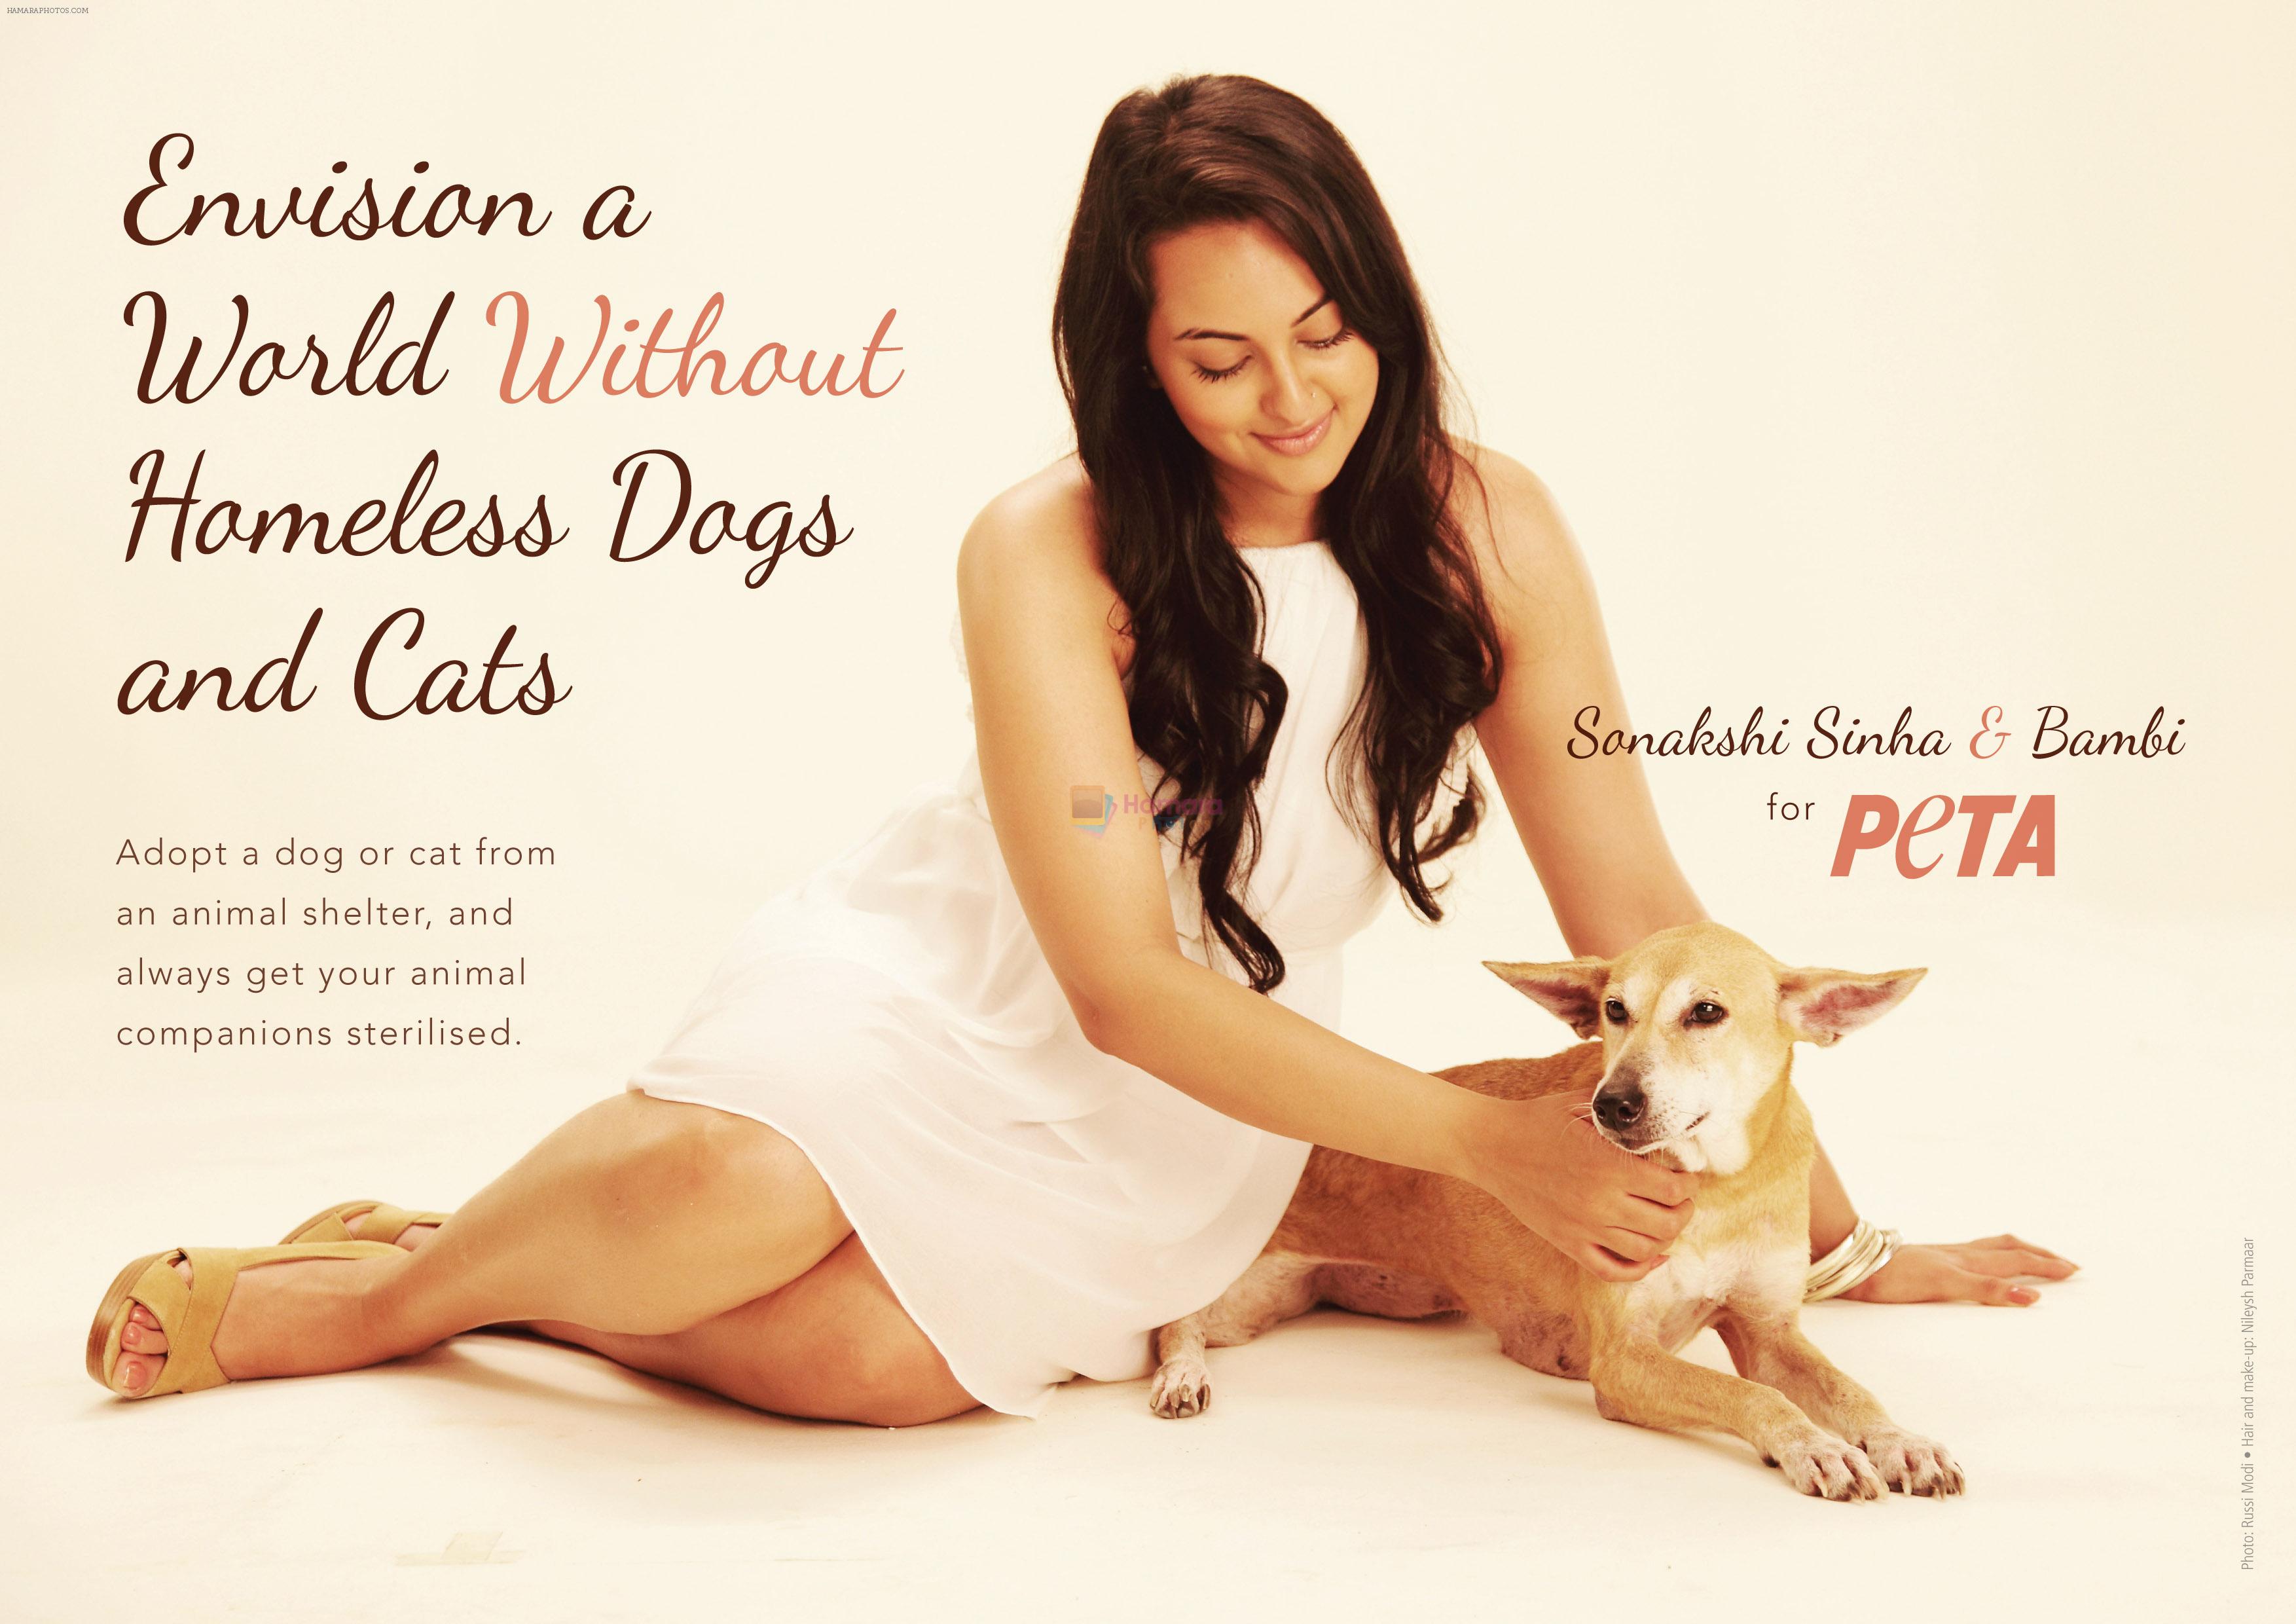 Sonakshi Sinha new advertisement urging her fans to adoct Cats and Dogs